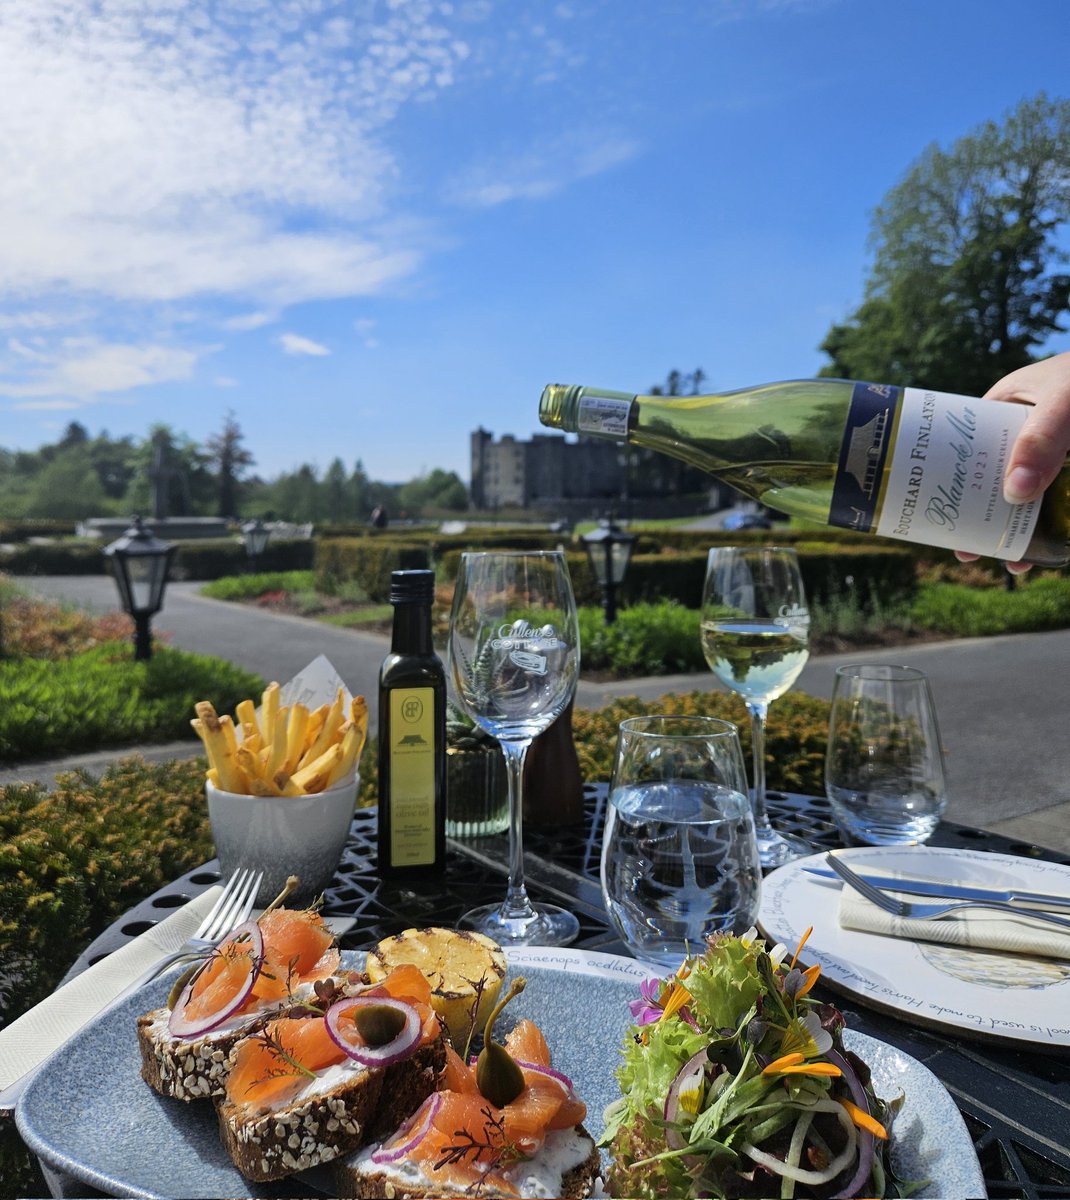 Join us at Cullen's at the Cottage this weekend for lunch from 1pm to 3.30pm, with live music every Sunday. Visitors and walk-ins are welcome! #AshfordCastle #RedCarnationHotels